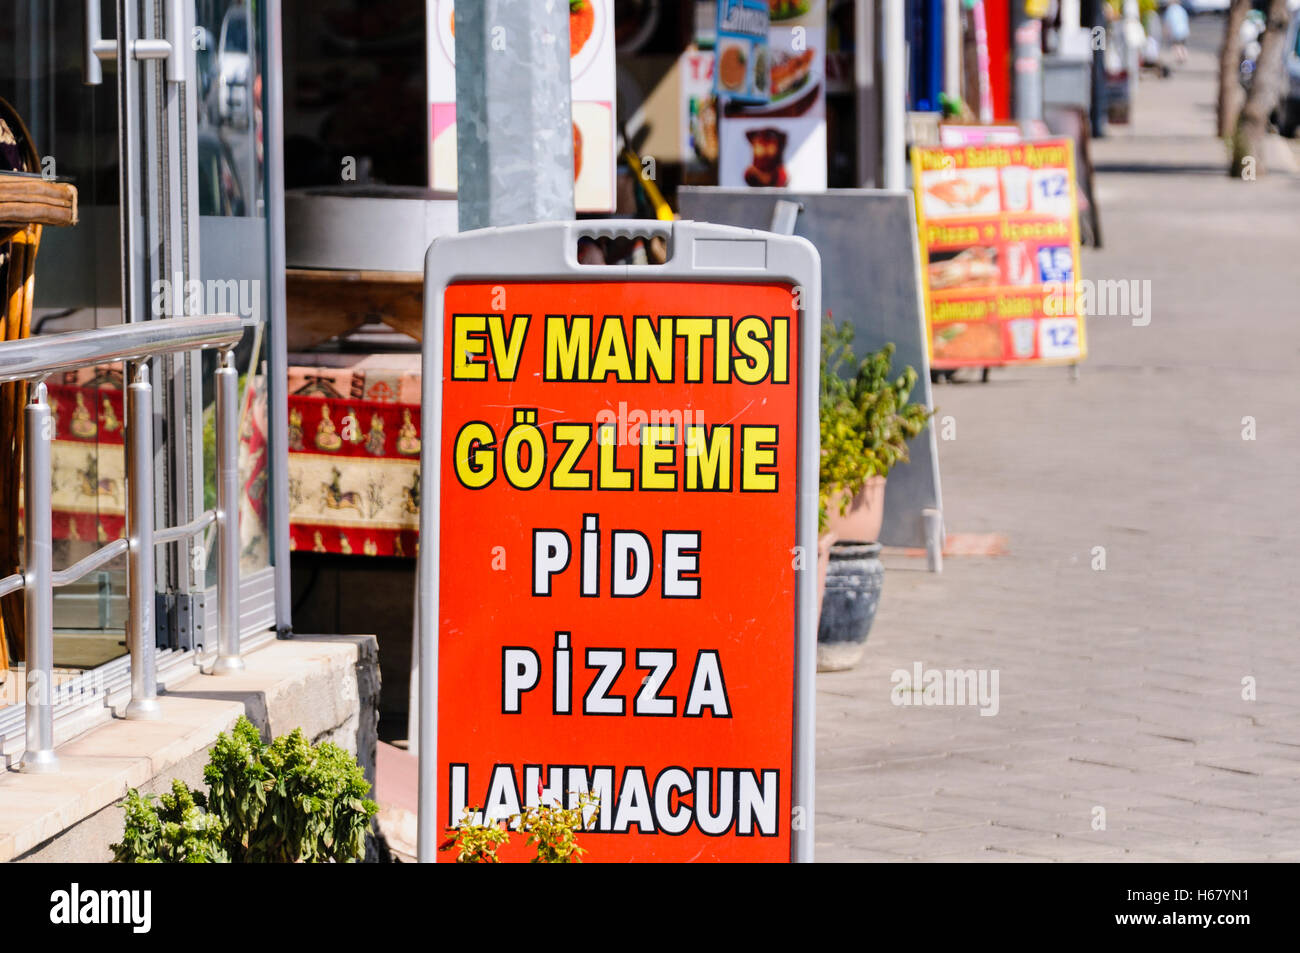 A-frame sign on the footpath outside a Turkish fast food shop advertising Pide (Turkish Pizza), Pizzas and Lahmacun Stock Photo